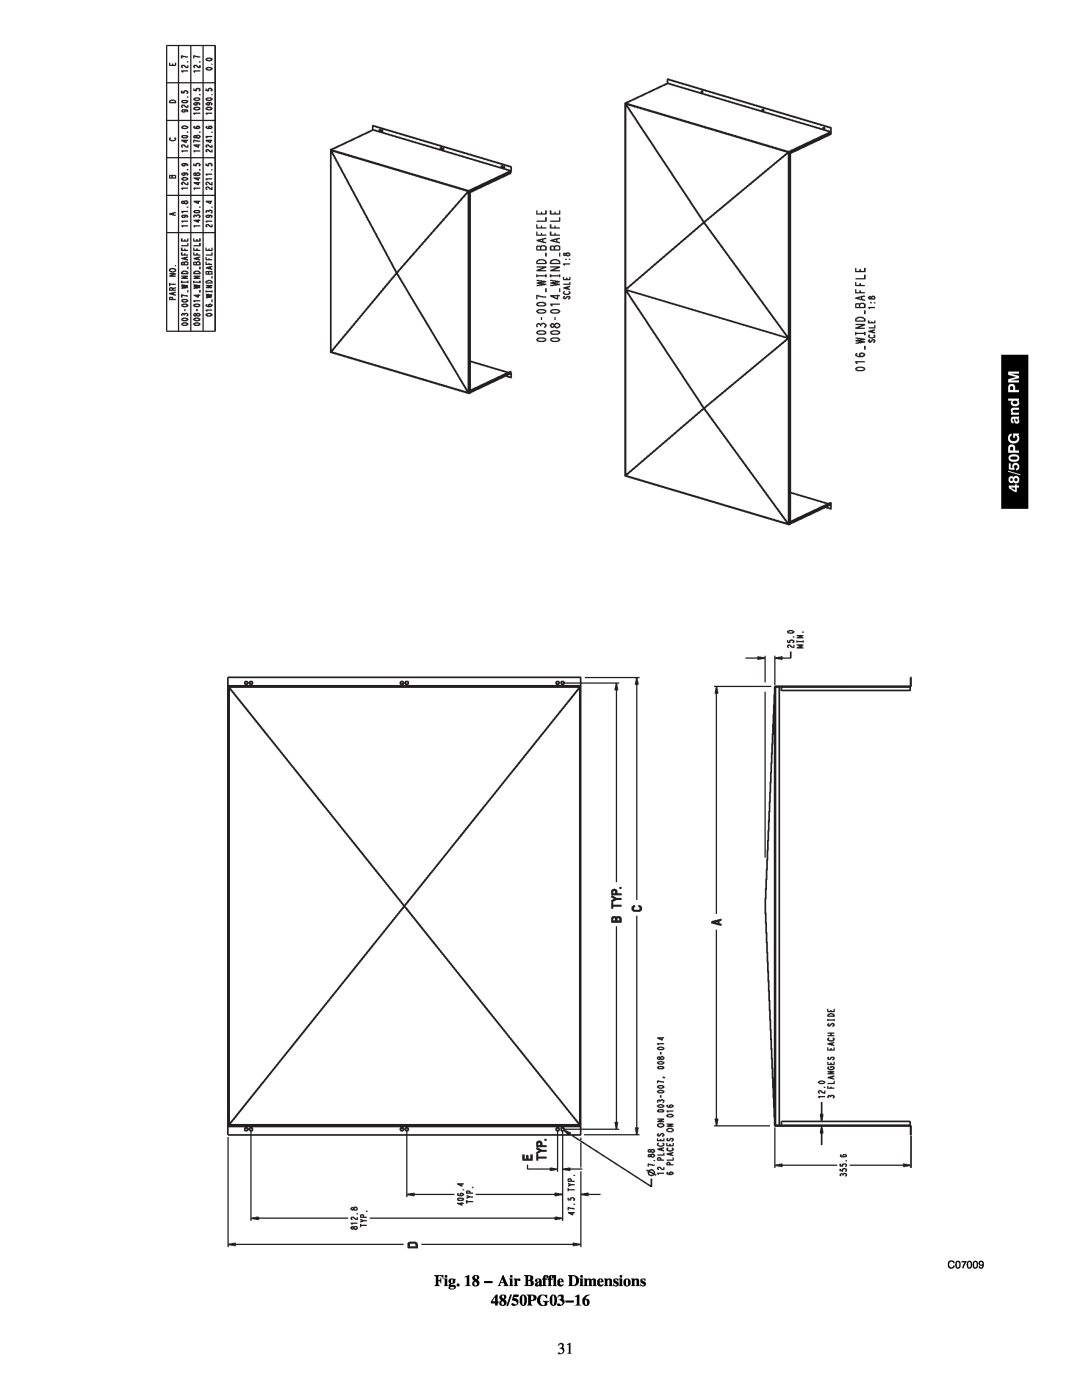 Carrier 48/50PM C16-28, 48/50PG C03-14 manual Air Baffle Dimensions 48/50PG03−16, 48/50PG and PM, C07009 